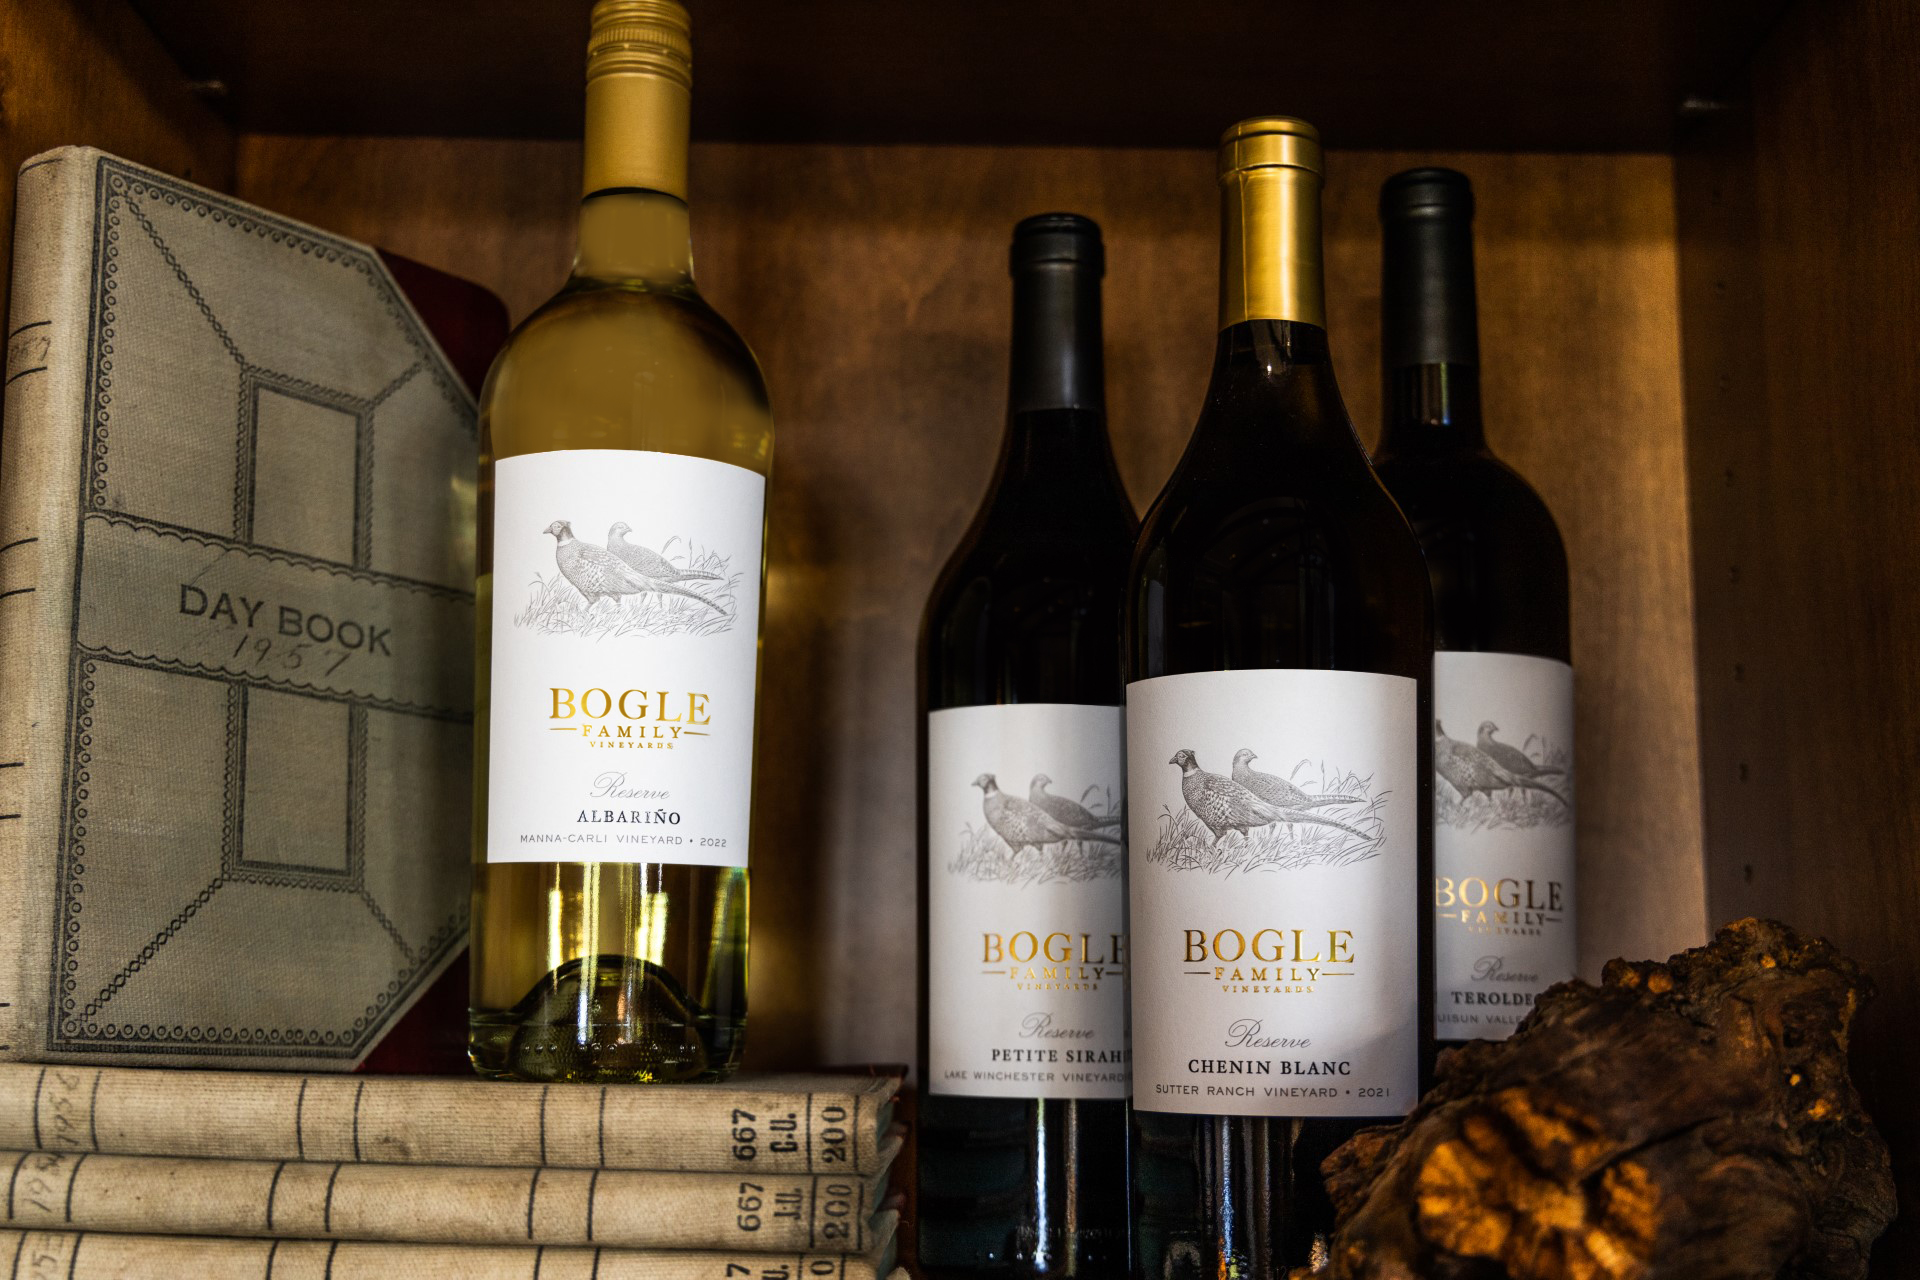 Bogle reserve wines get a fresh yet classic new label